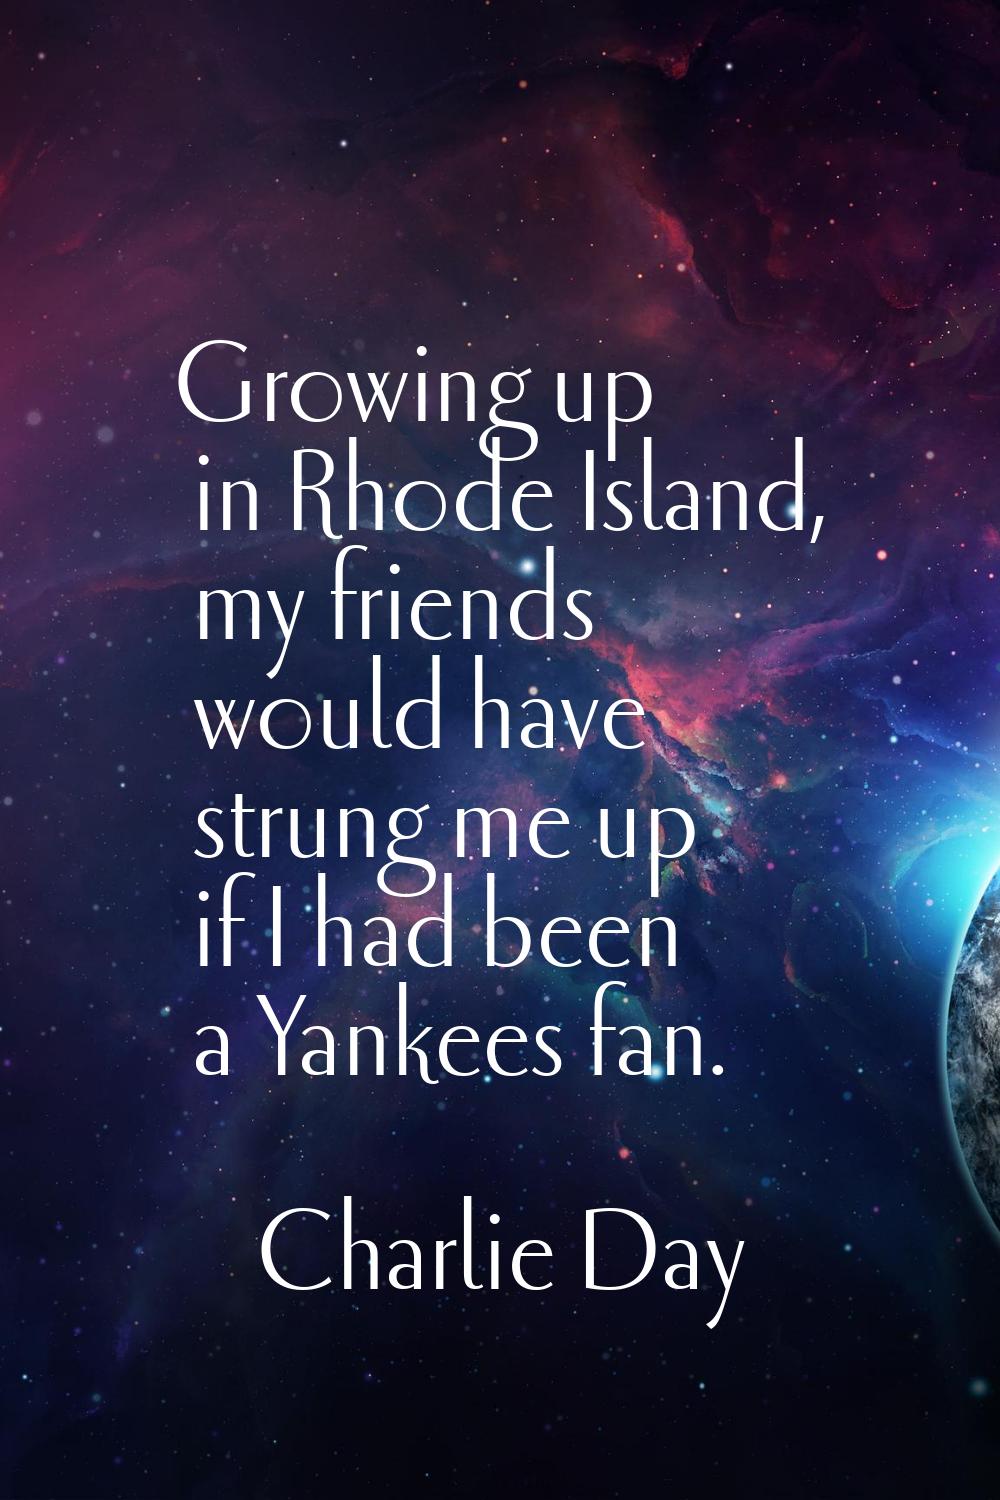 Growing up in Rhode Island, my friends would have strung me up if I had been a Yankees fan.